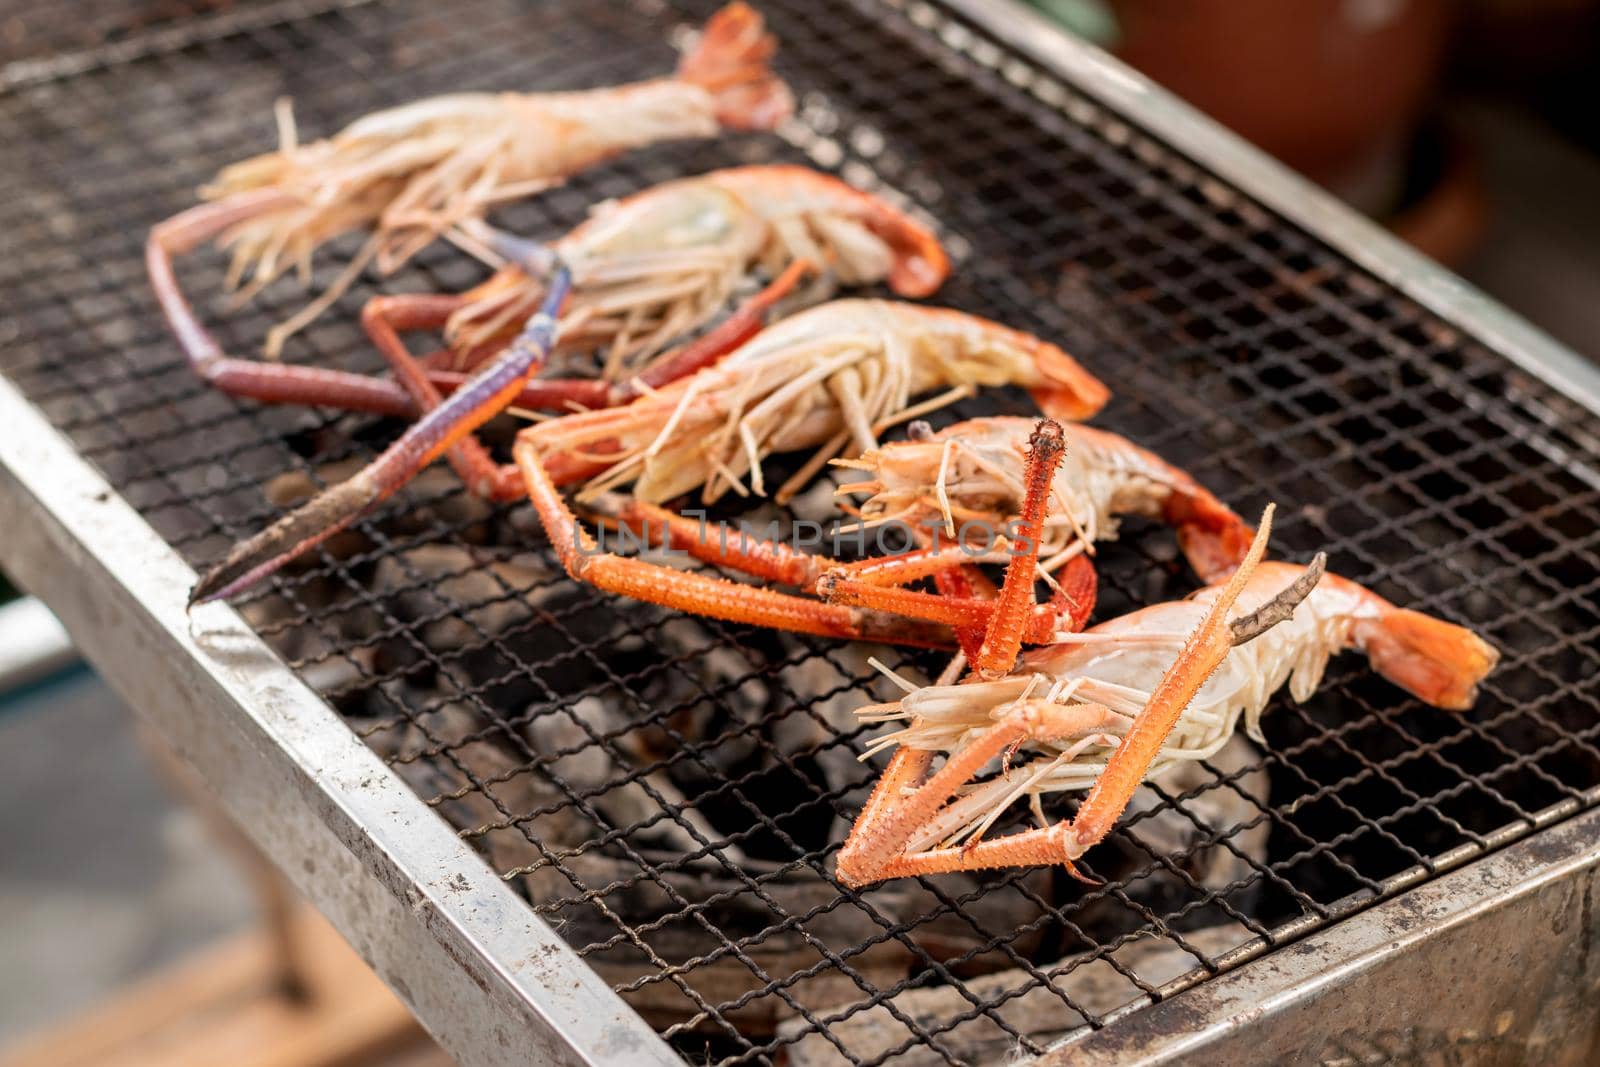 Some river prawns grilled on the iron rack over the charcoal. by wattanaphob